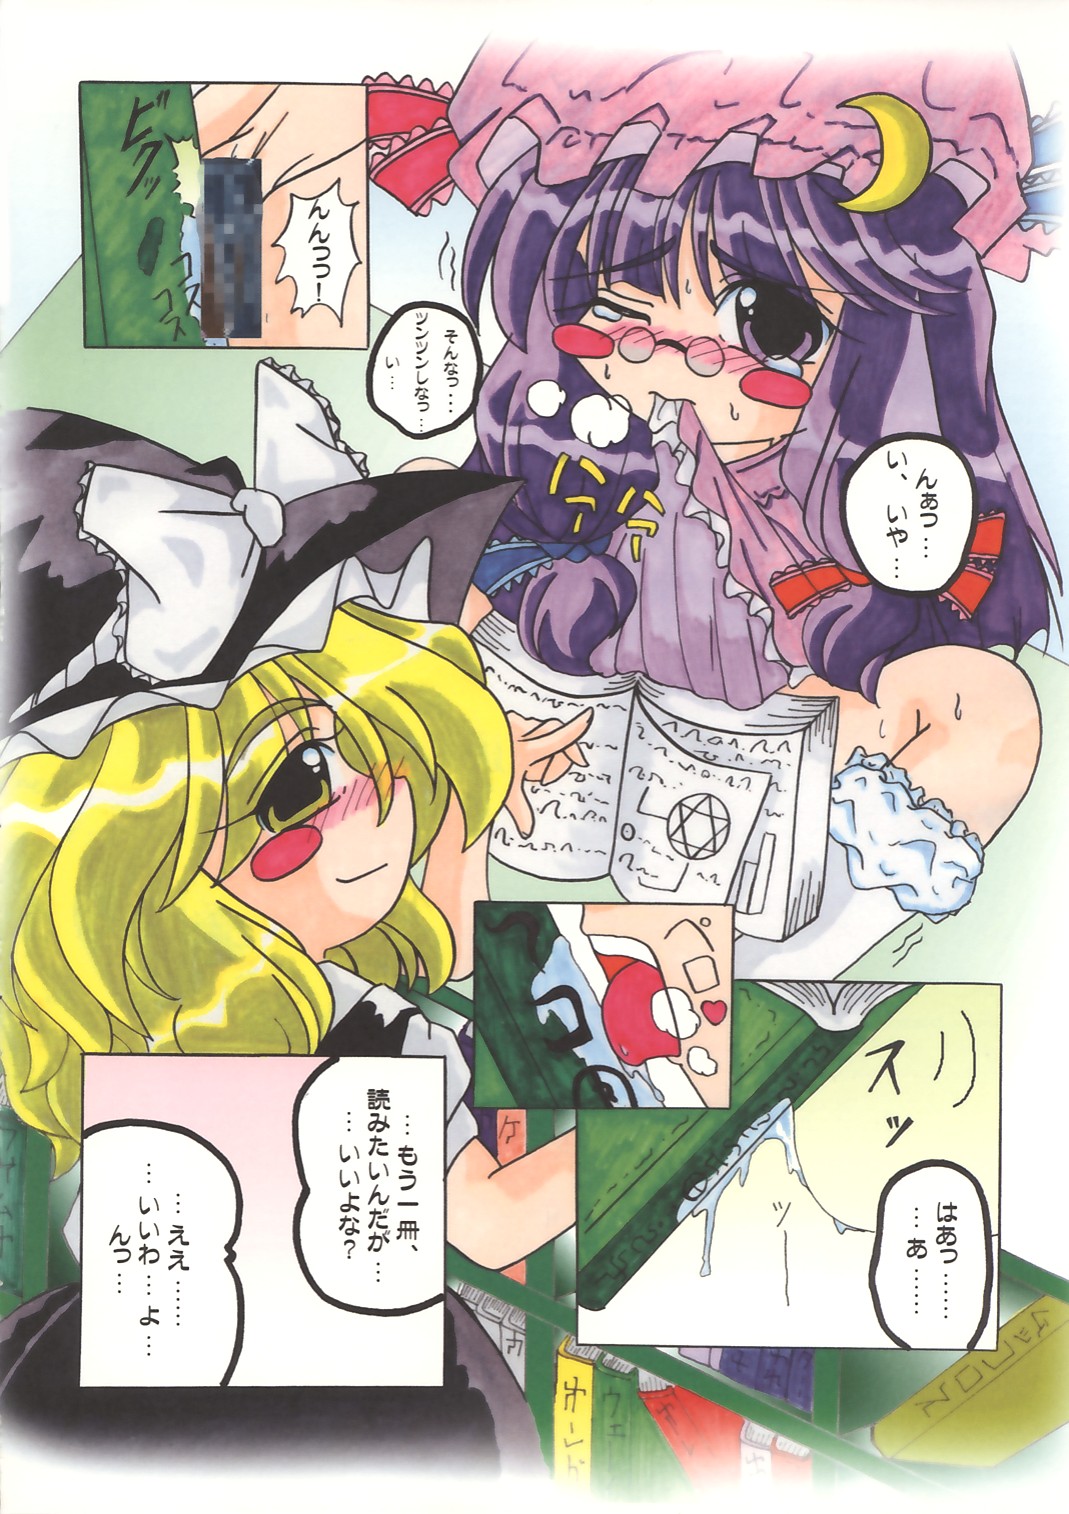 (C66) [Luft Forst (Various)] Moe Touhou Gensoukyou - Ura Touhou (Touhou Project) page 13 full